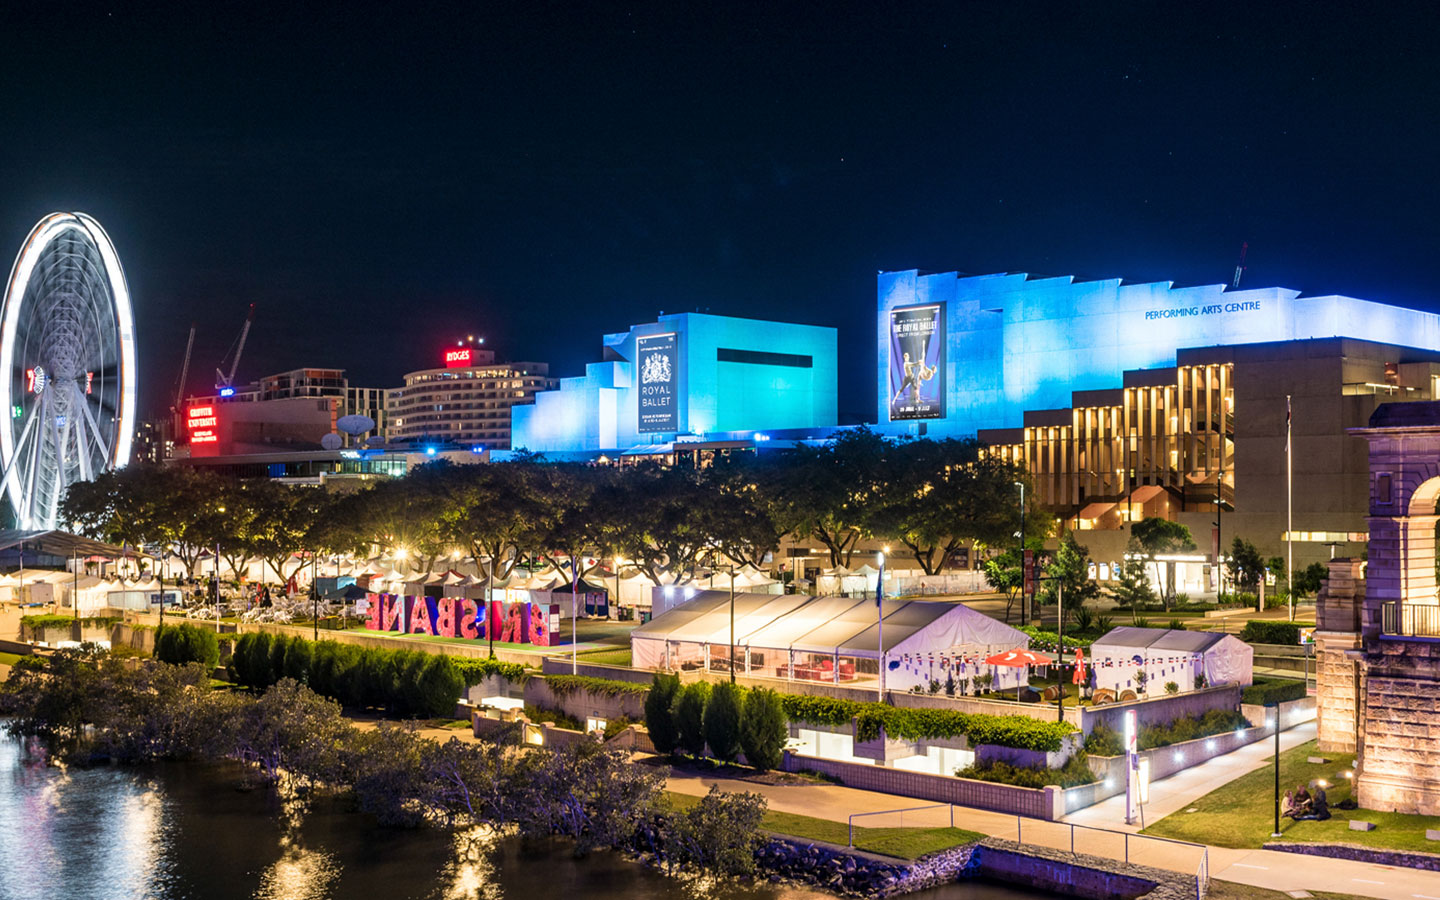 One of Australia’s most spectacular concert venues, Queensland Performing Arts Centre at night.